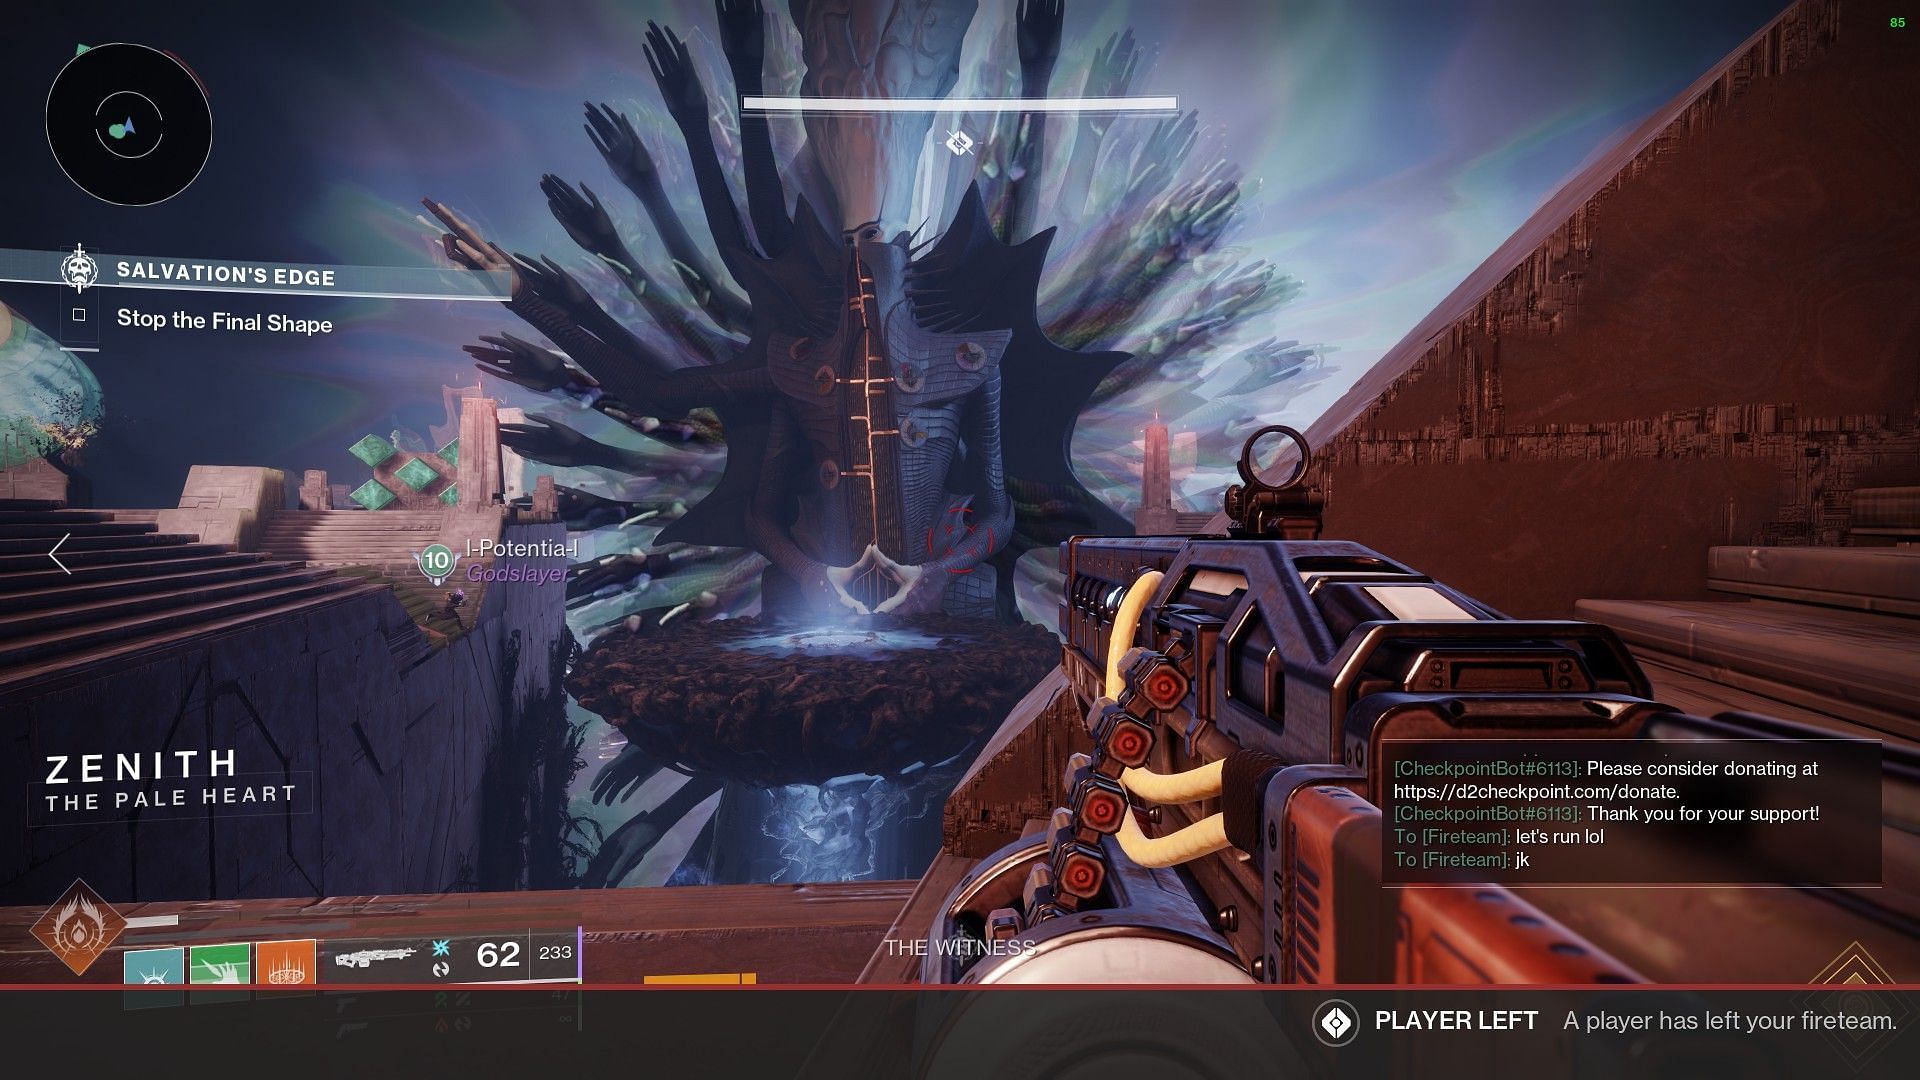 The Witness in the Raid (Image via Bungie)